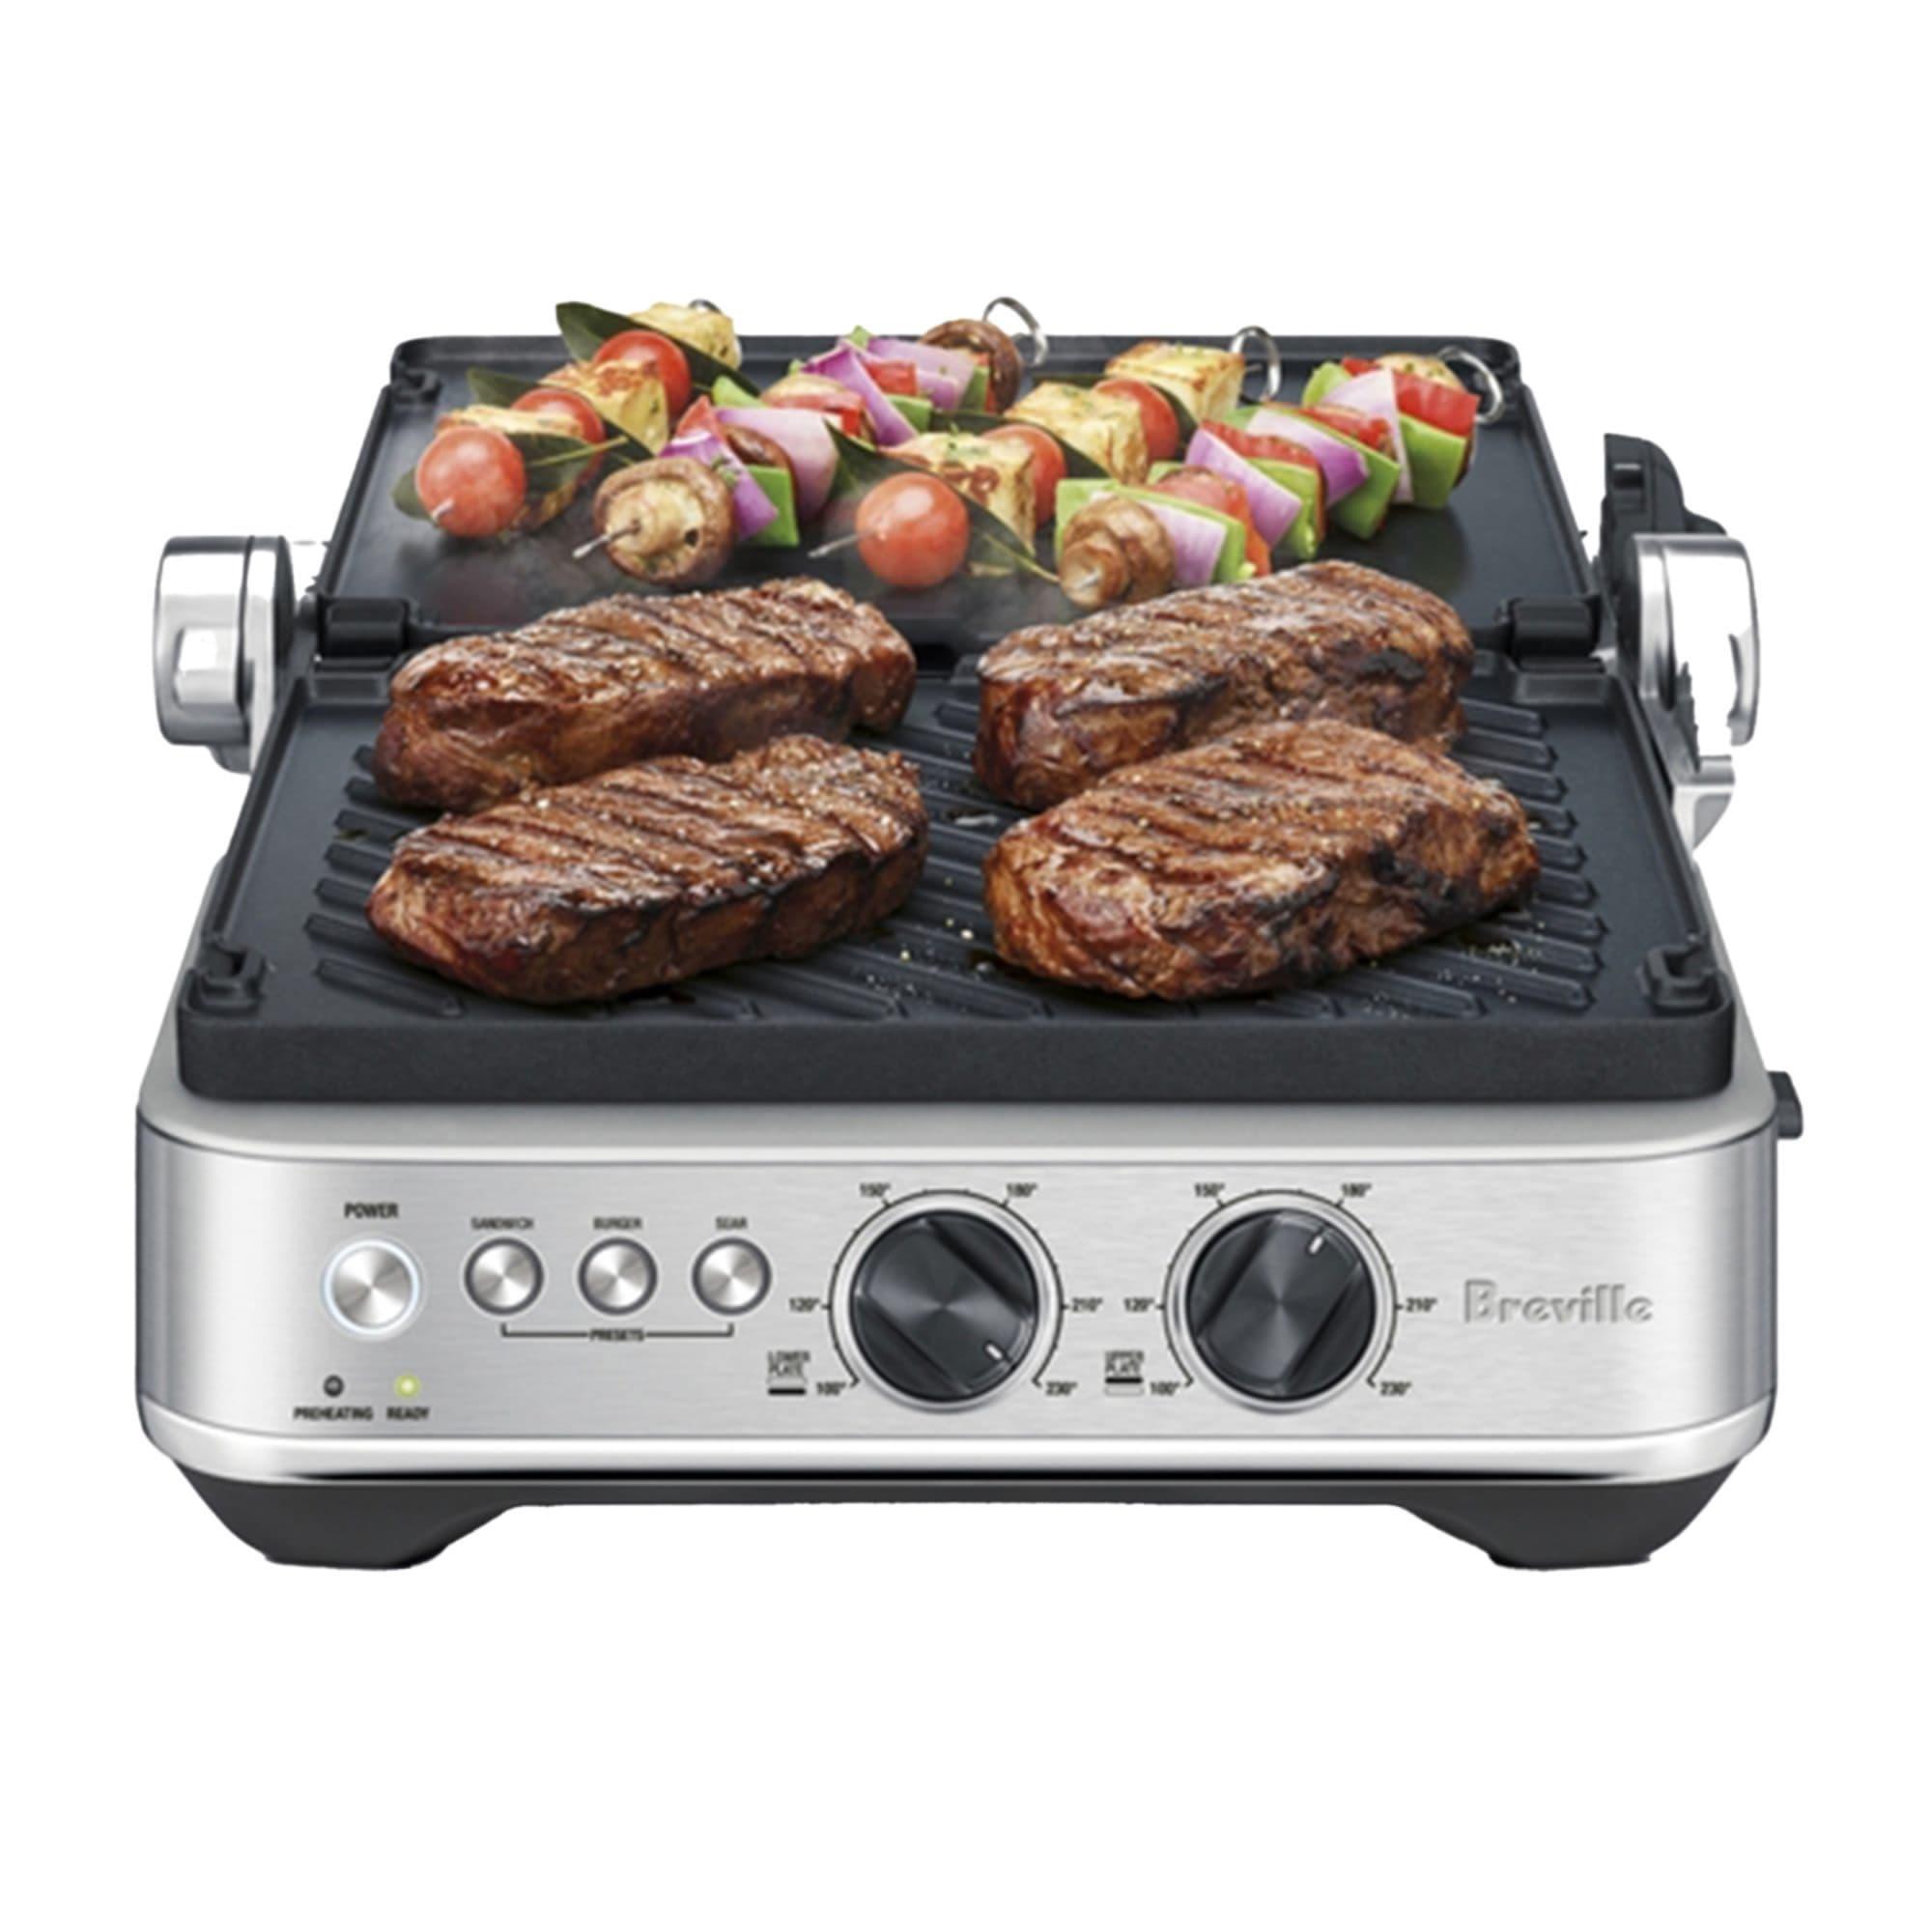 Breville The Sear & Press Grill Brushed Stainless Steel Image 3